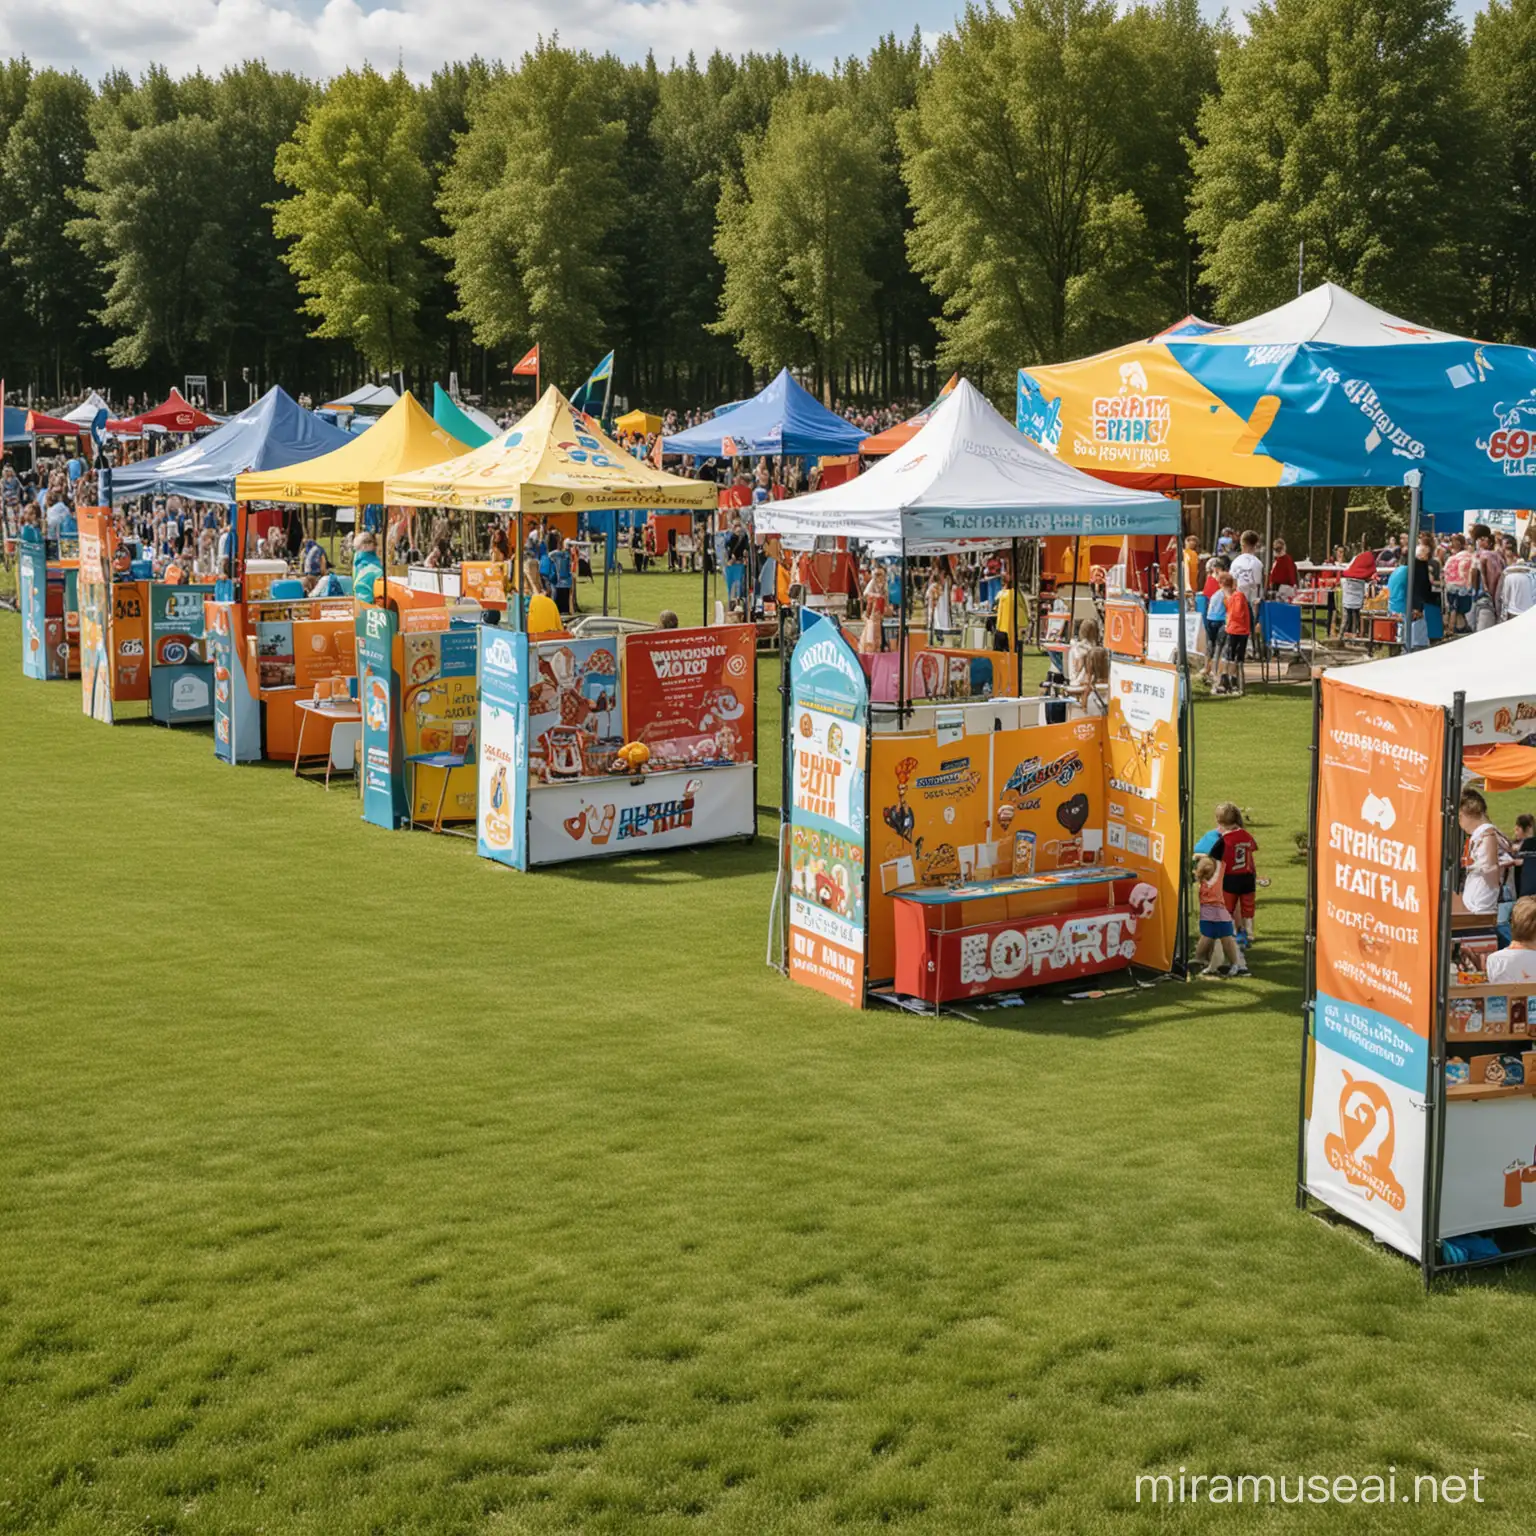 sport fair for kids with booths of sport associations outside in a field front view
